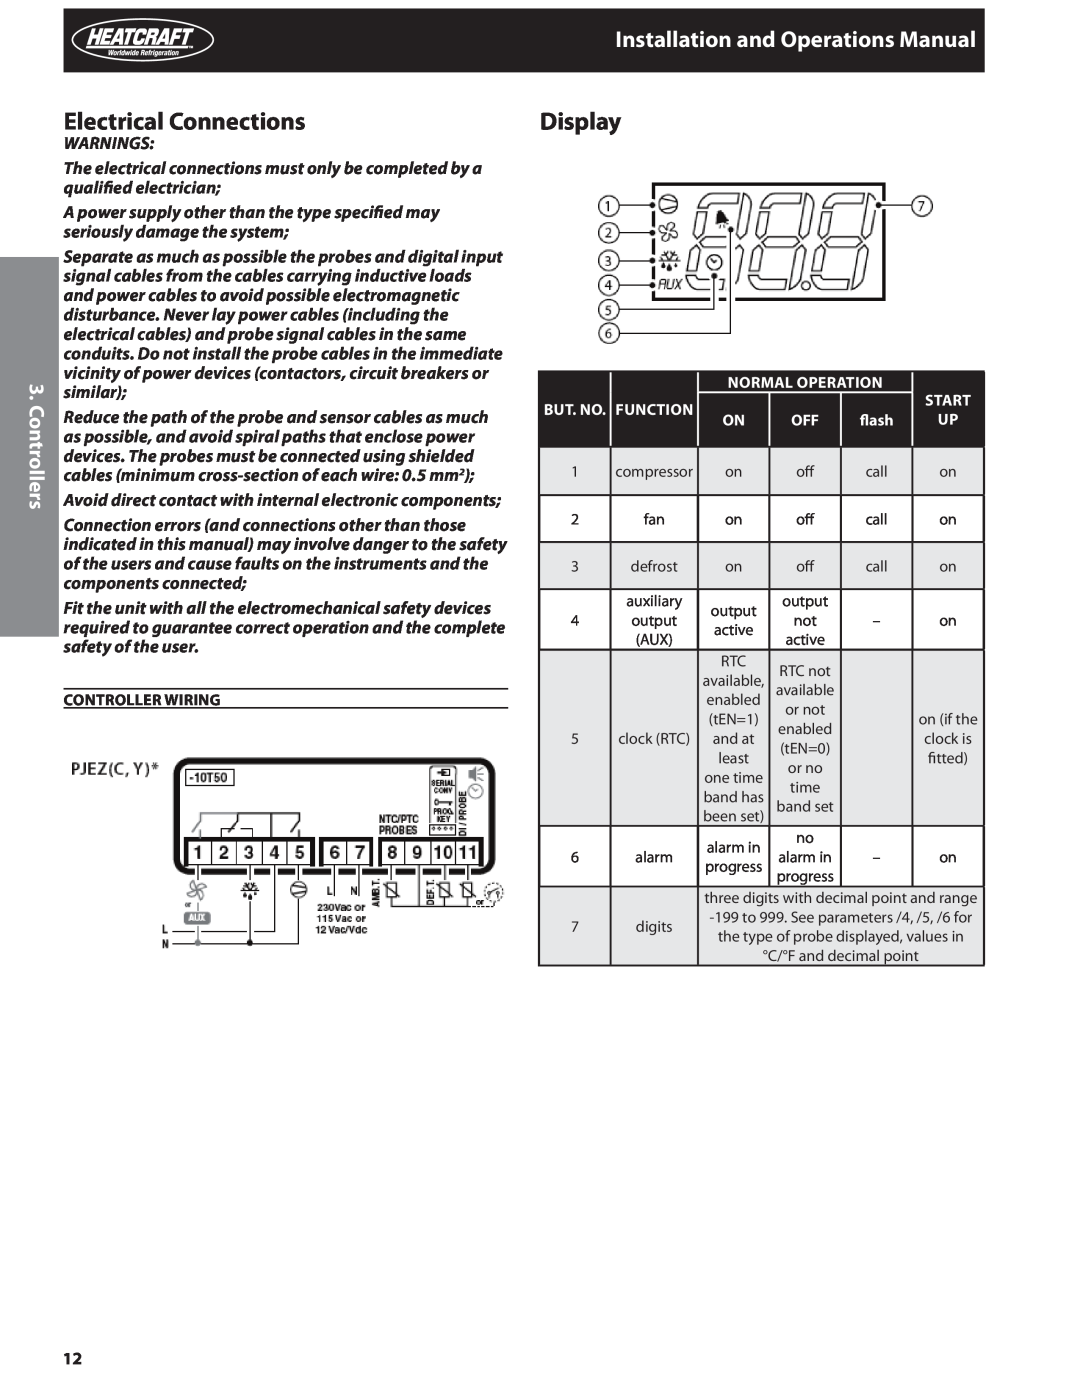 Heatcraft Refrigeration Products H-IM-82C Electrical Connections, Display, Installation and Operations Manual 